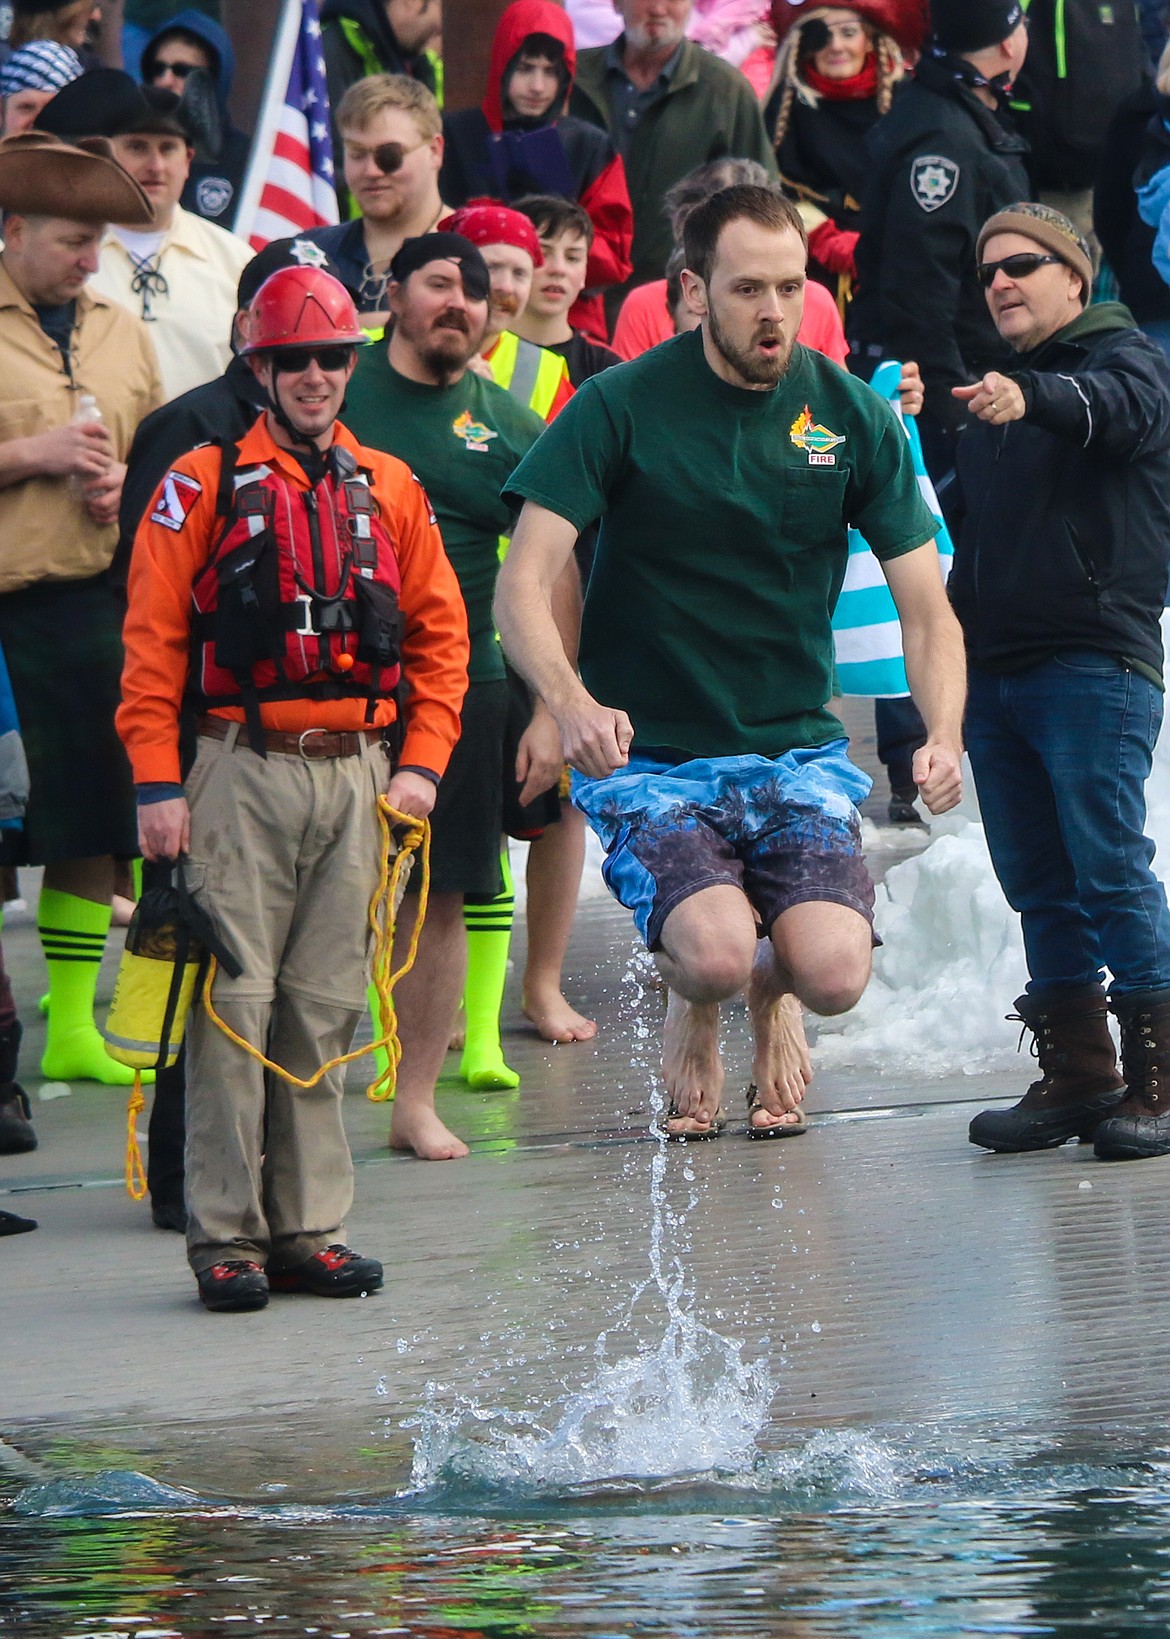 Photo by MANDI BATEMAN
Idaho Department of Lands Forester Jonathan Luhnow taking the plunge.